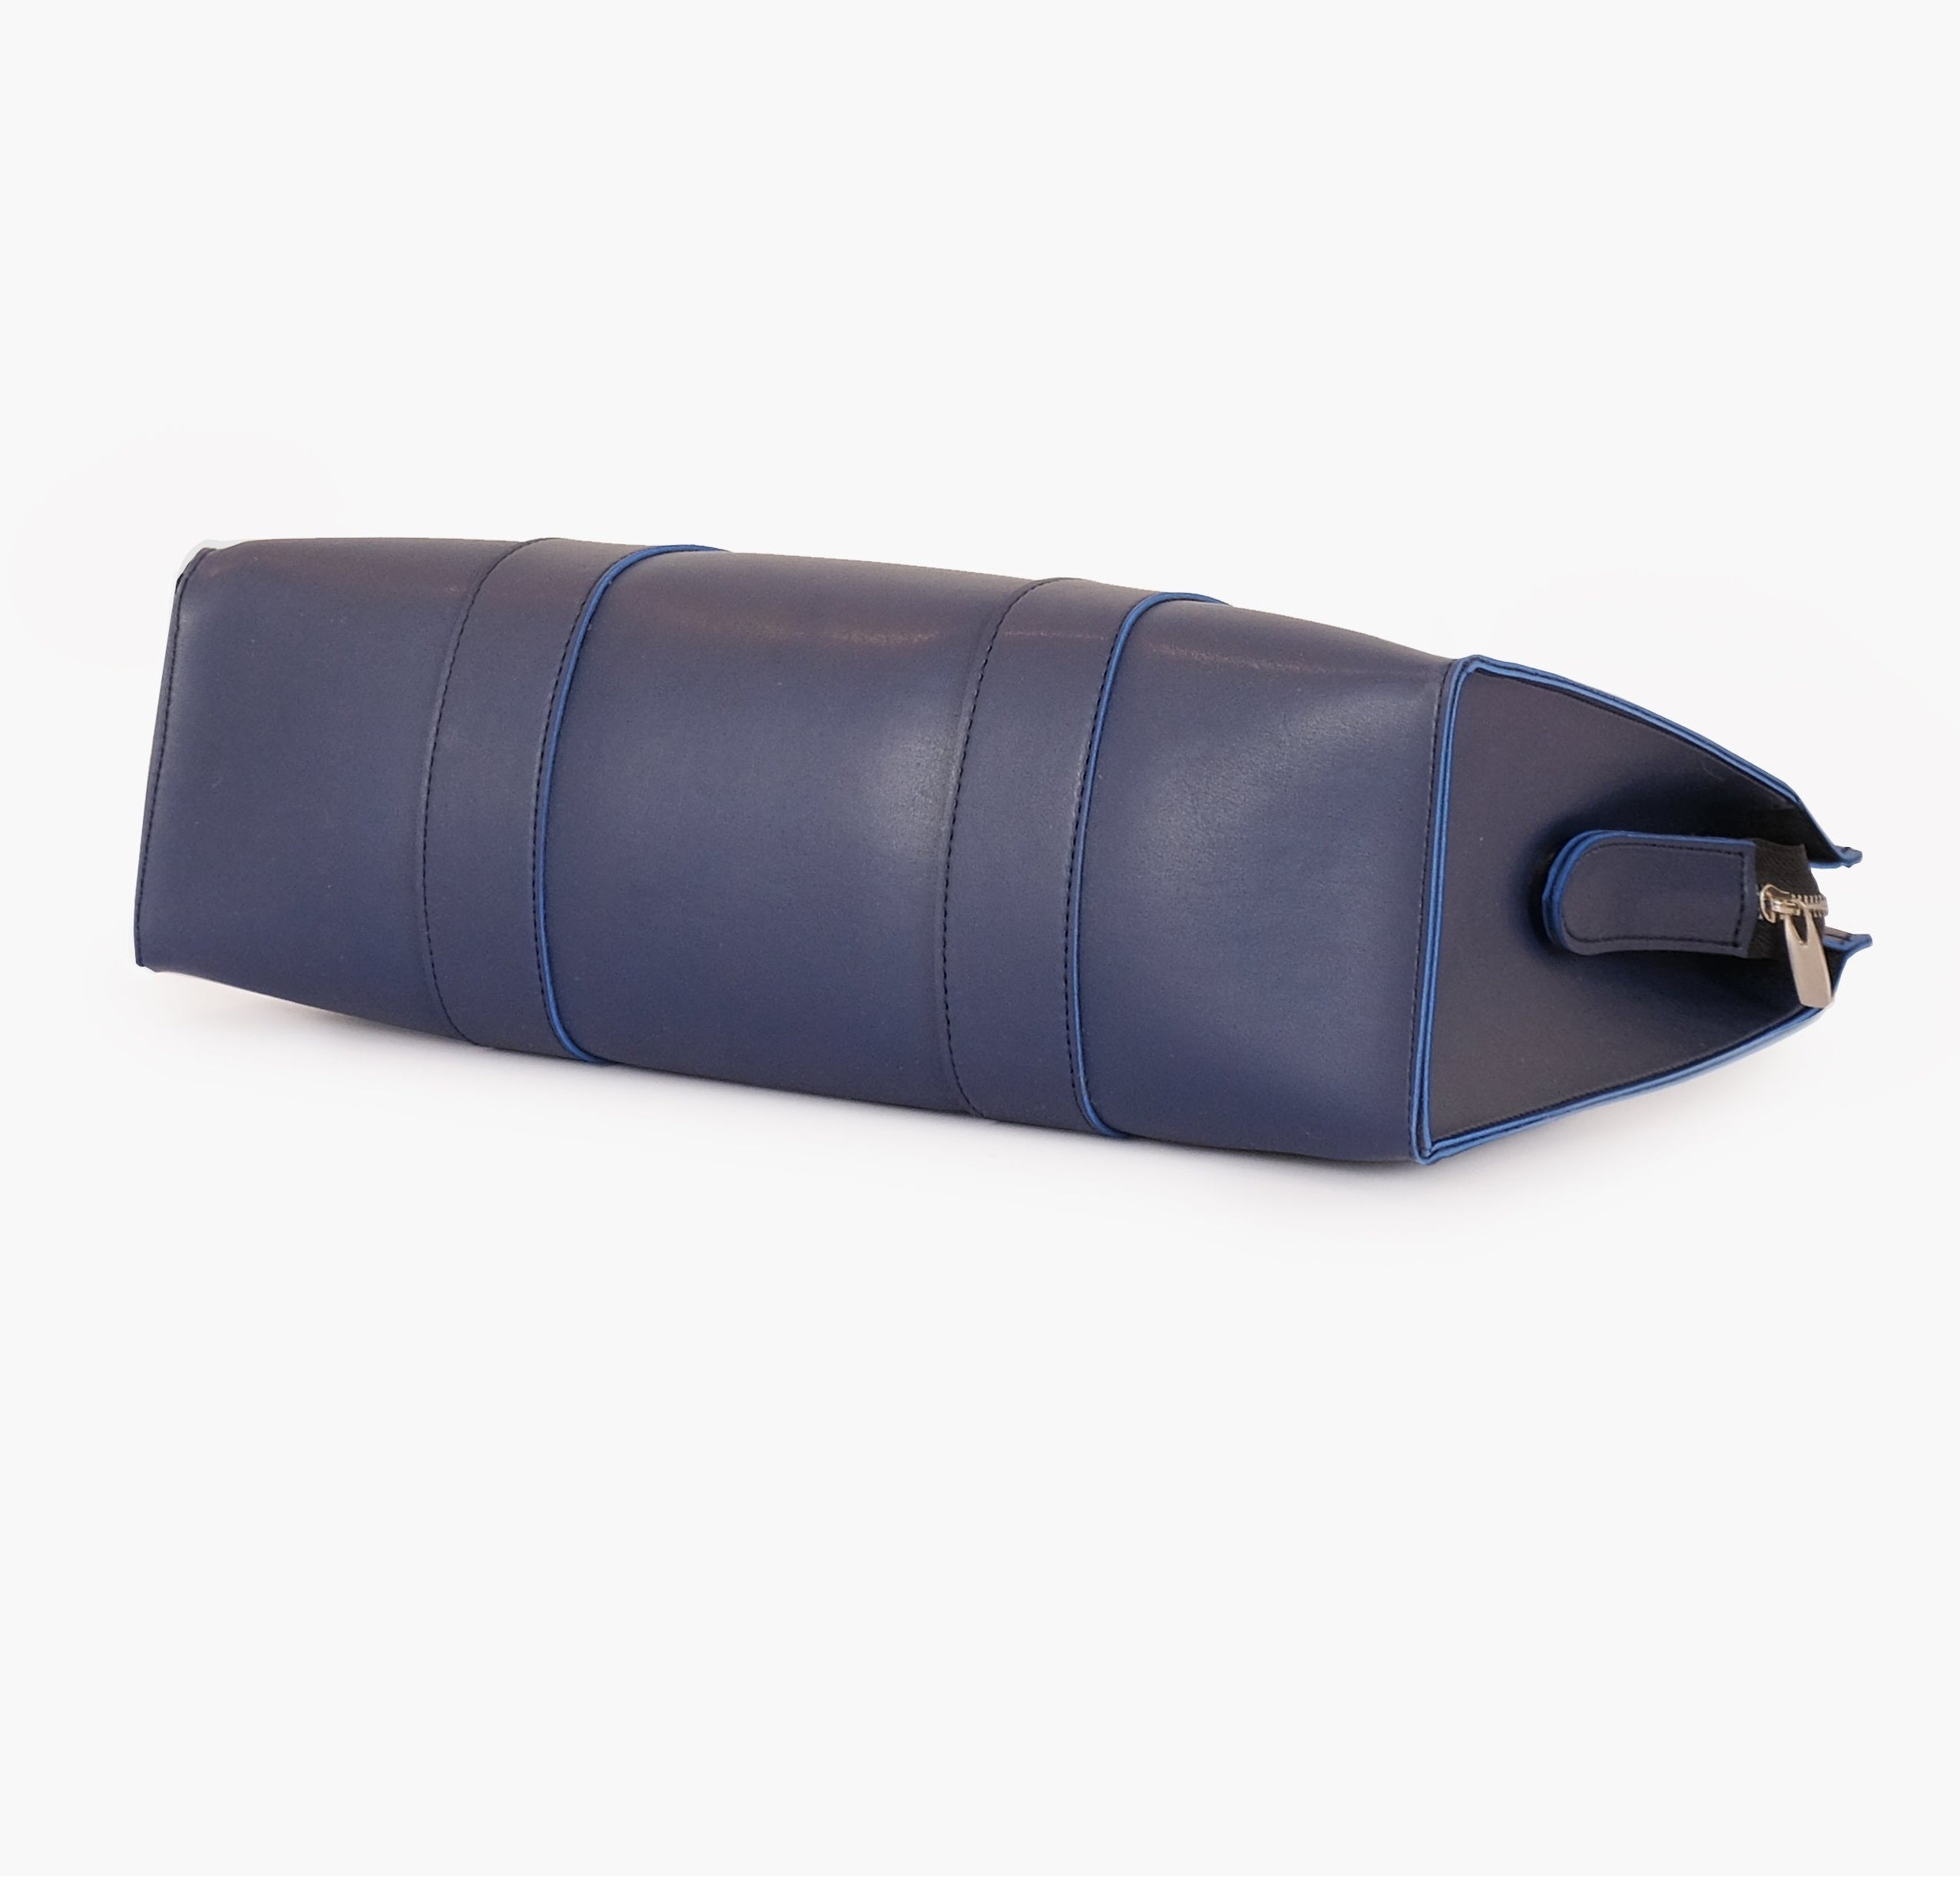 Blue Laptop Bag With Sleeve 612